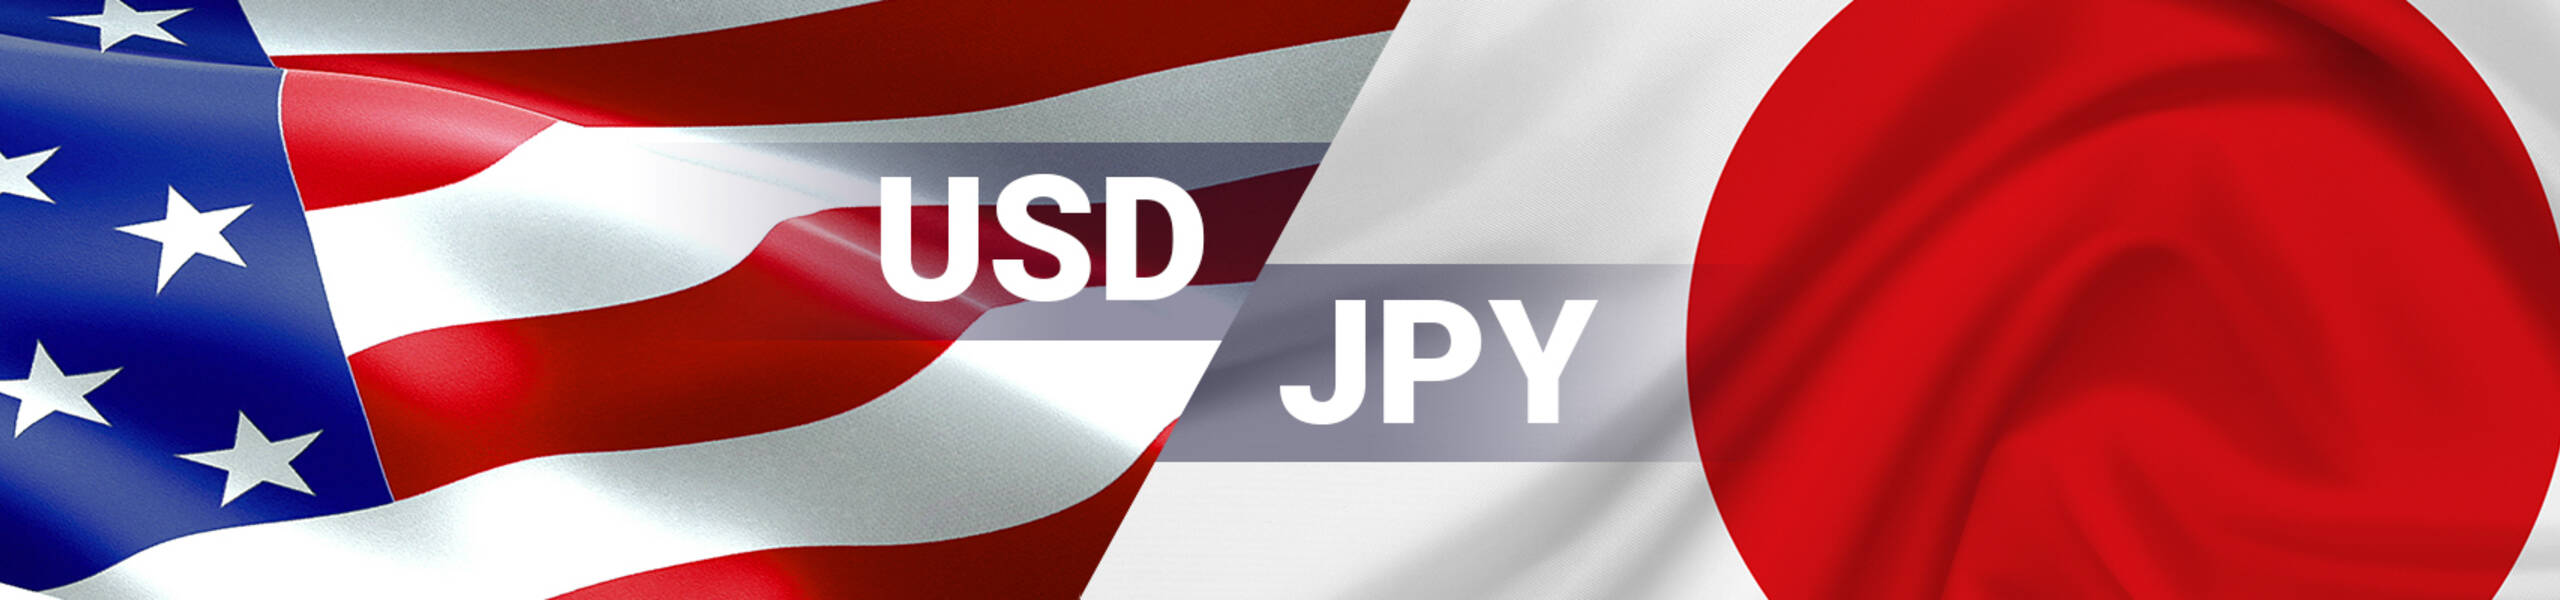 USD/JPY: dollar ready to continue uptrend